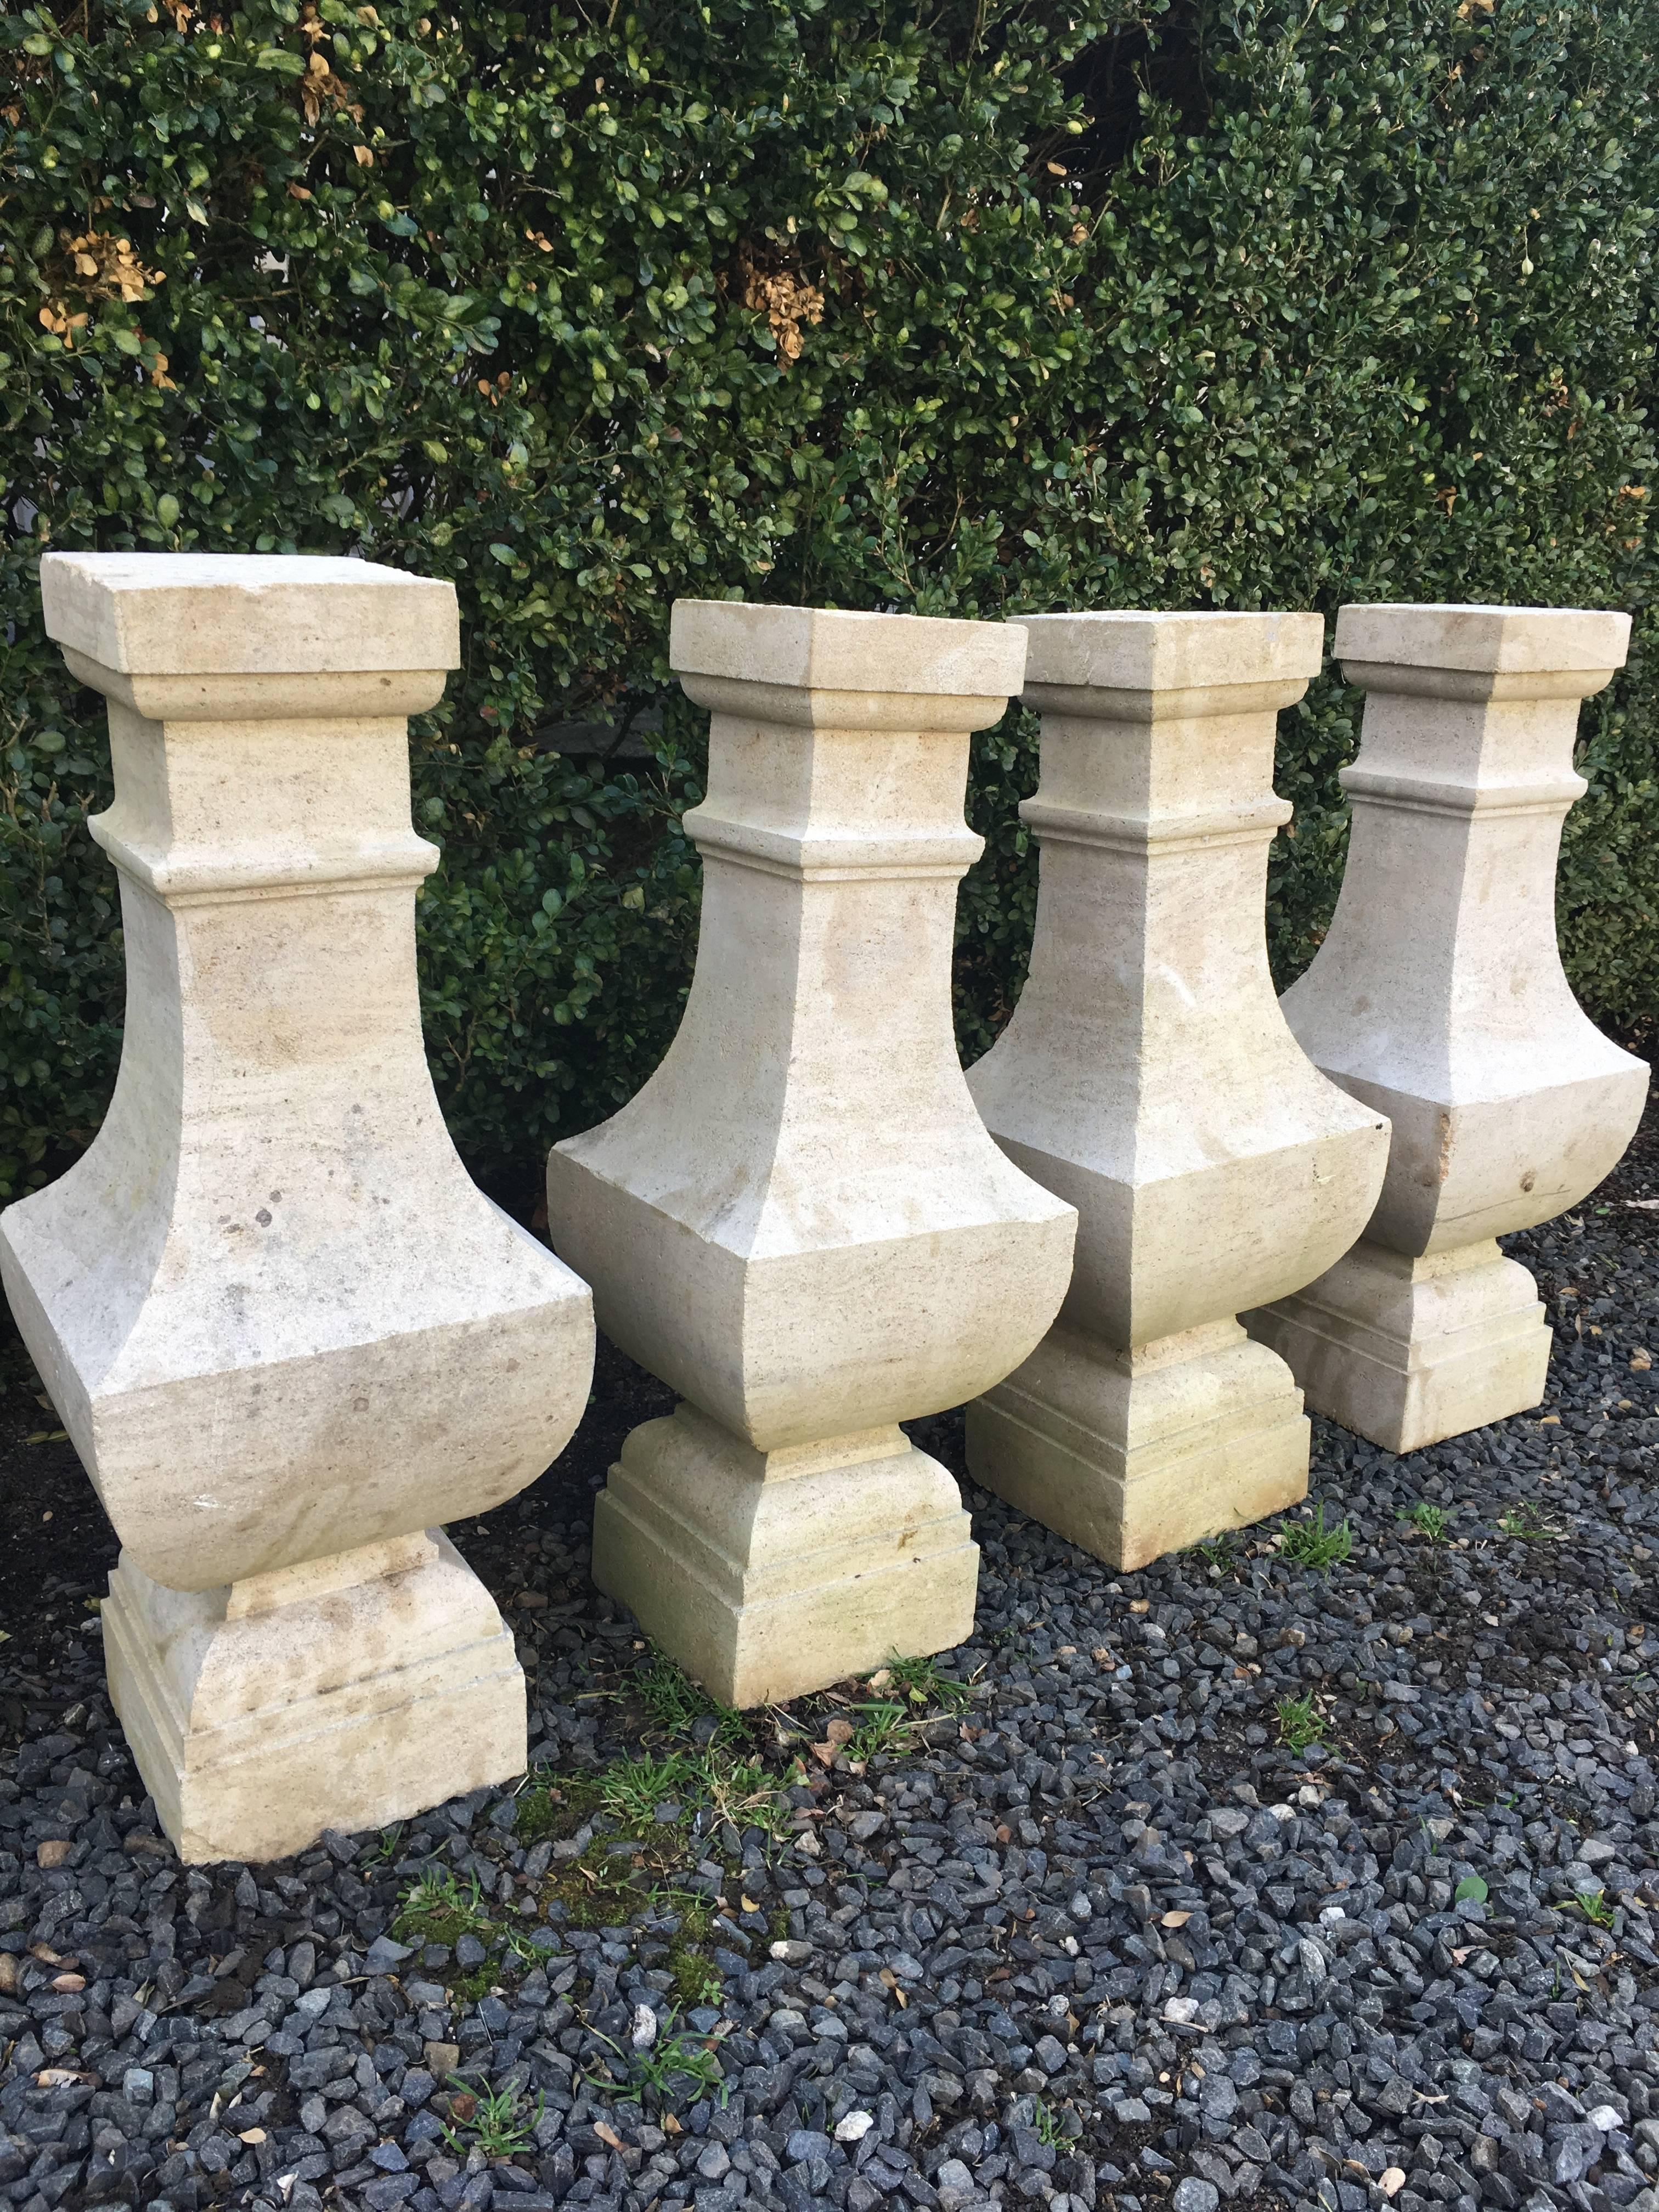 These beautiful carved limestone balusters originally graced the Palais de Justice in Brussels and we were fortunate enough to grab them from a local Dutch dealer. They would be wonderful as bases for demilune or round side tables topped with a